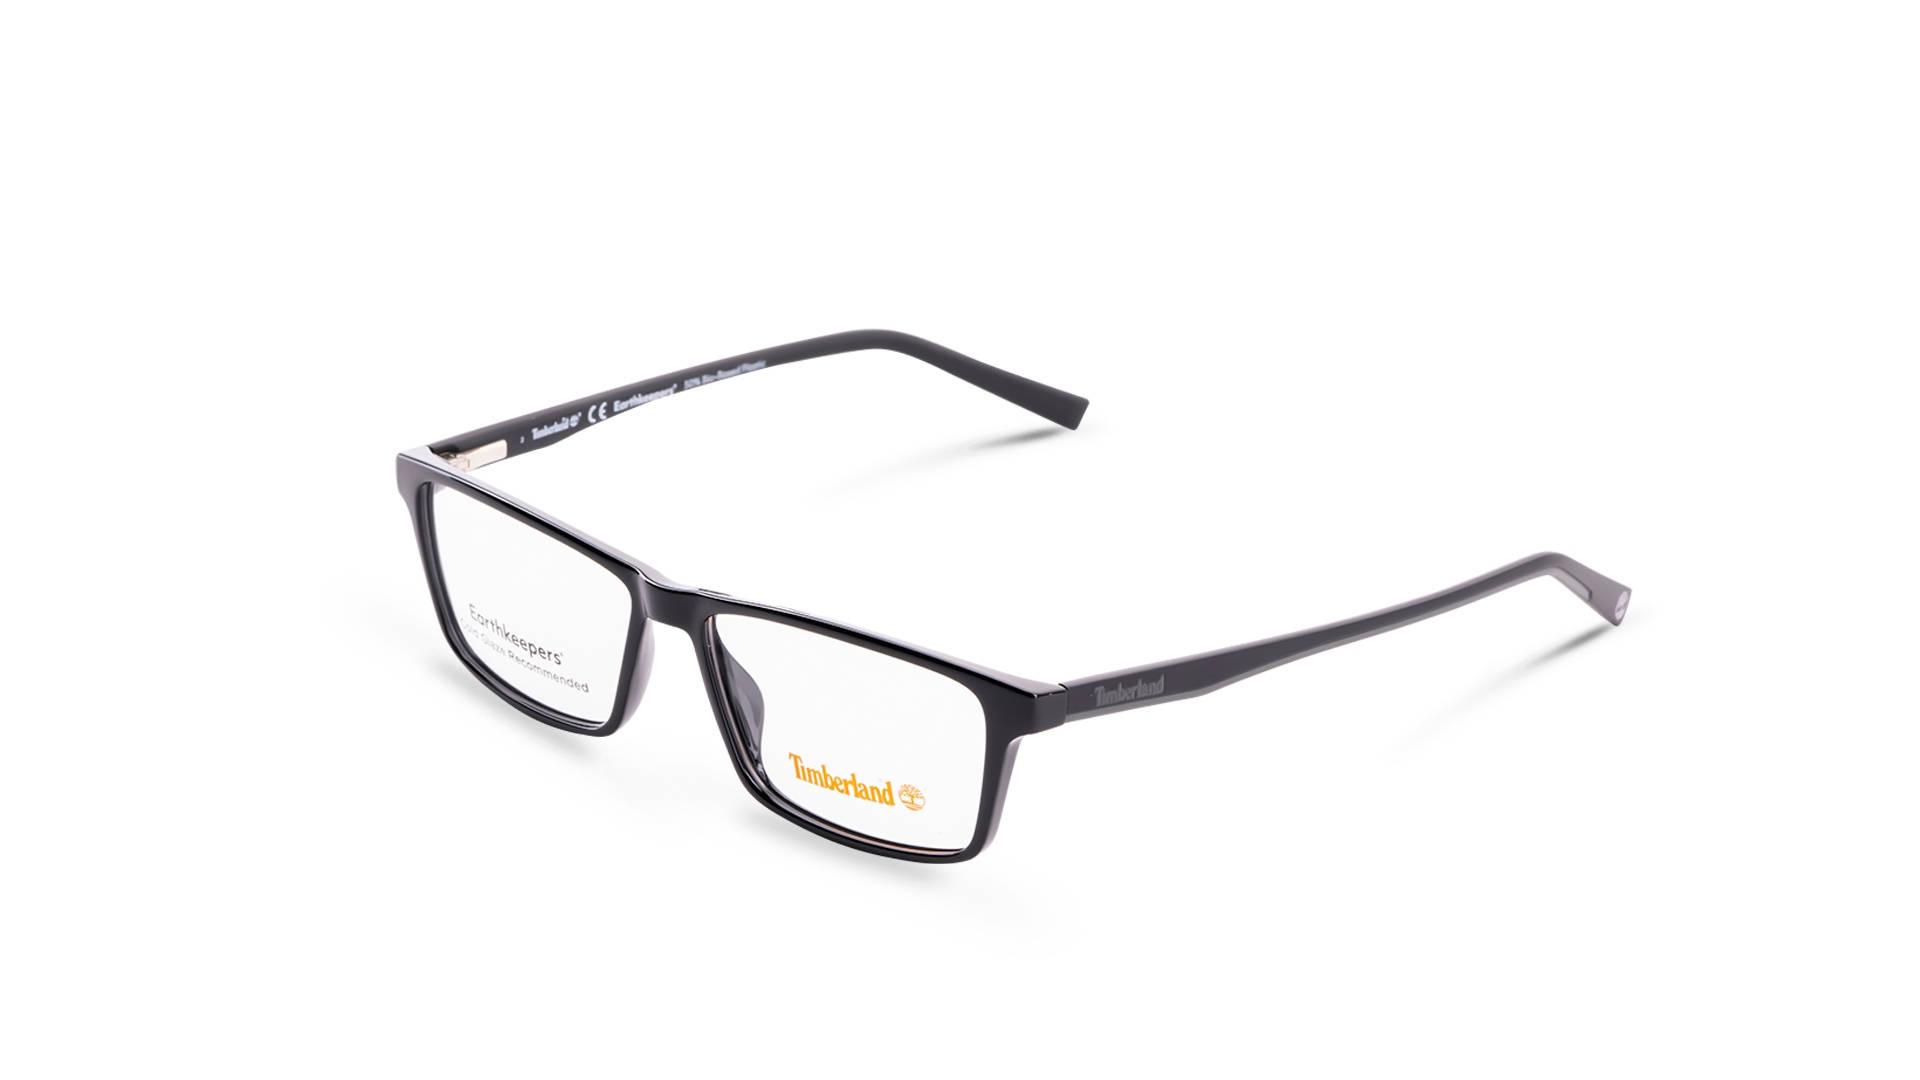 Durable Timberland Eyeglasses With Clear Lenses Wallpaper